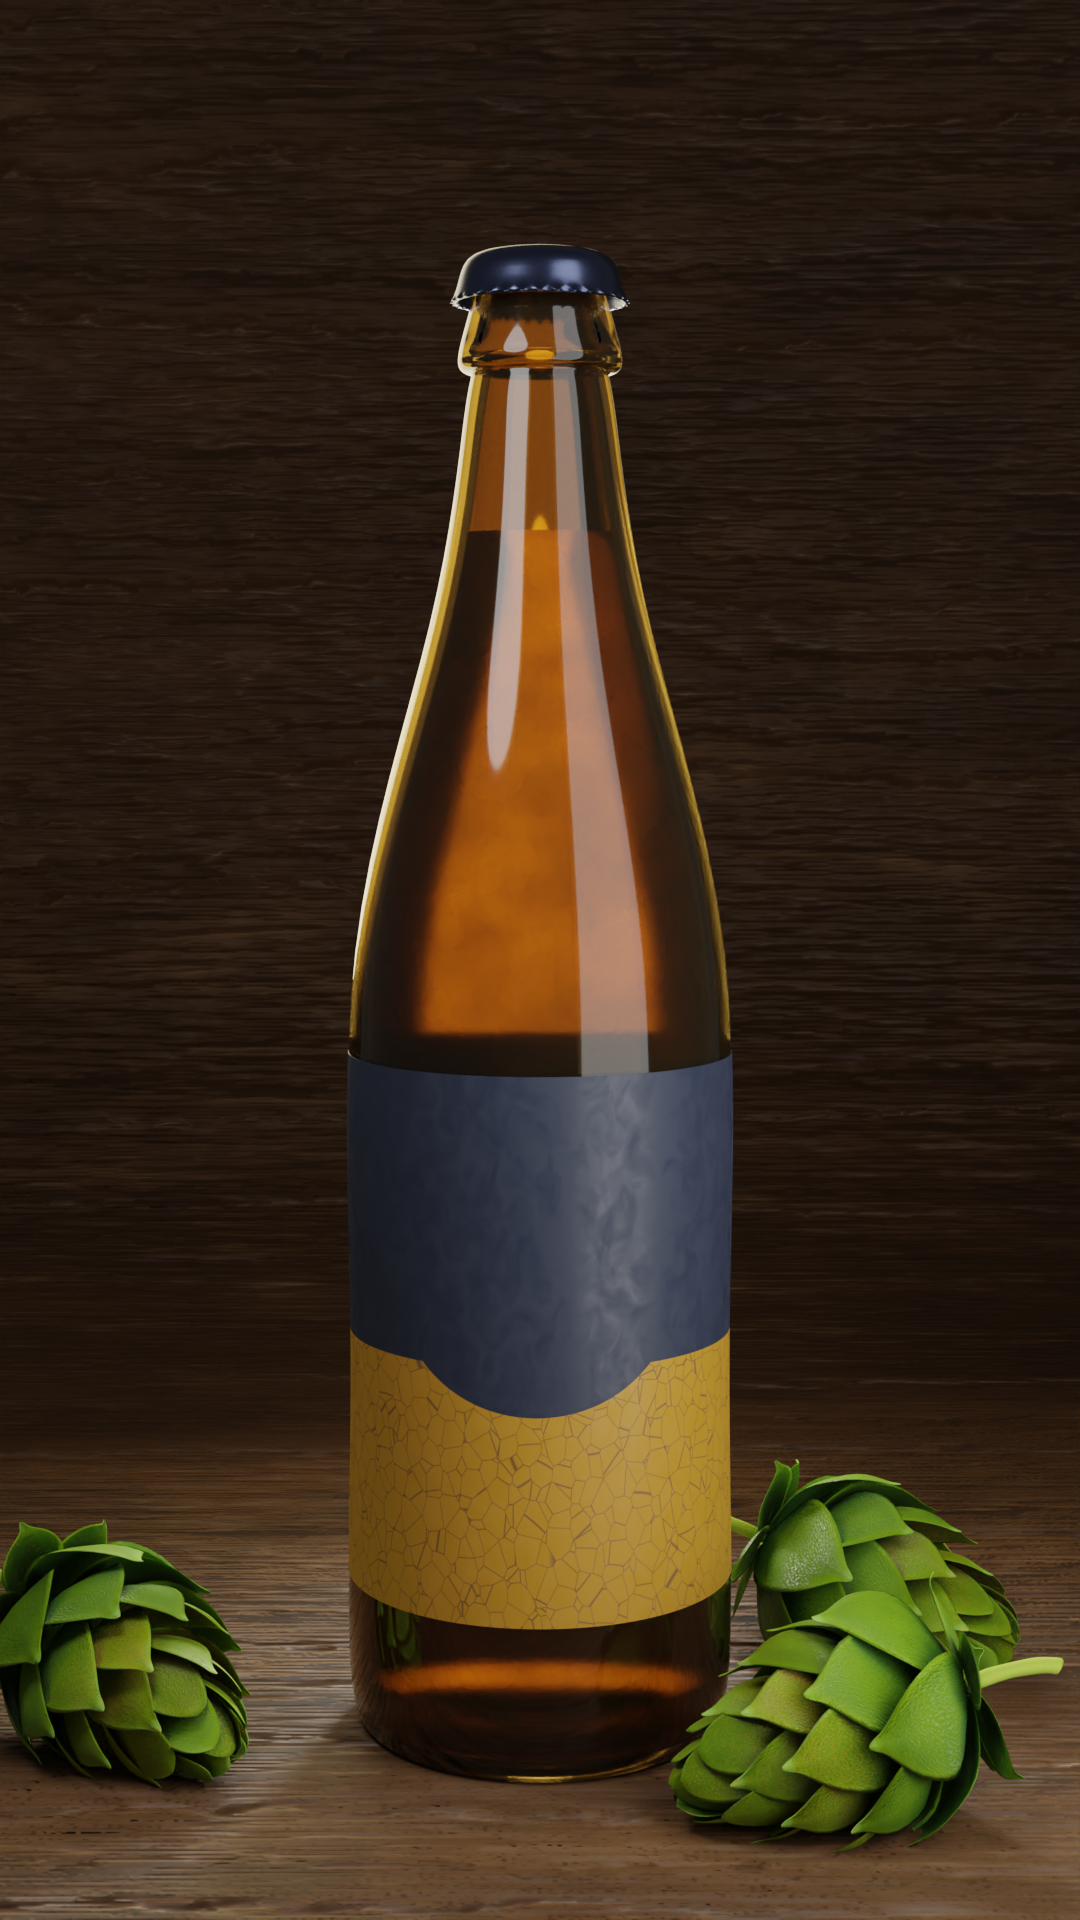  A bottle of beer preview image 1